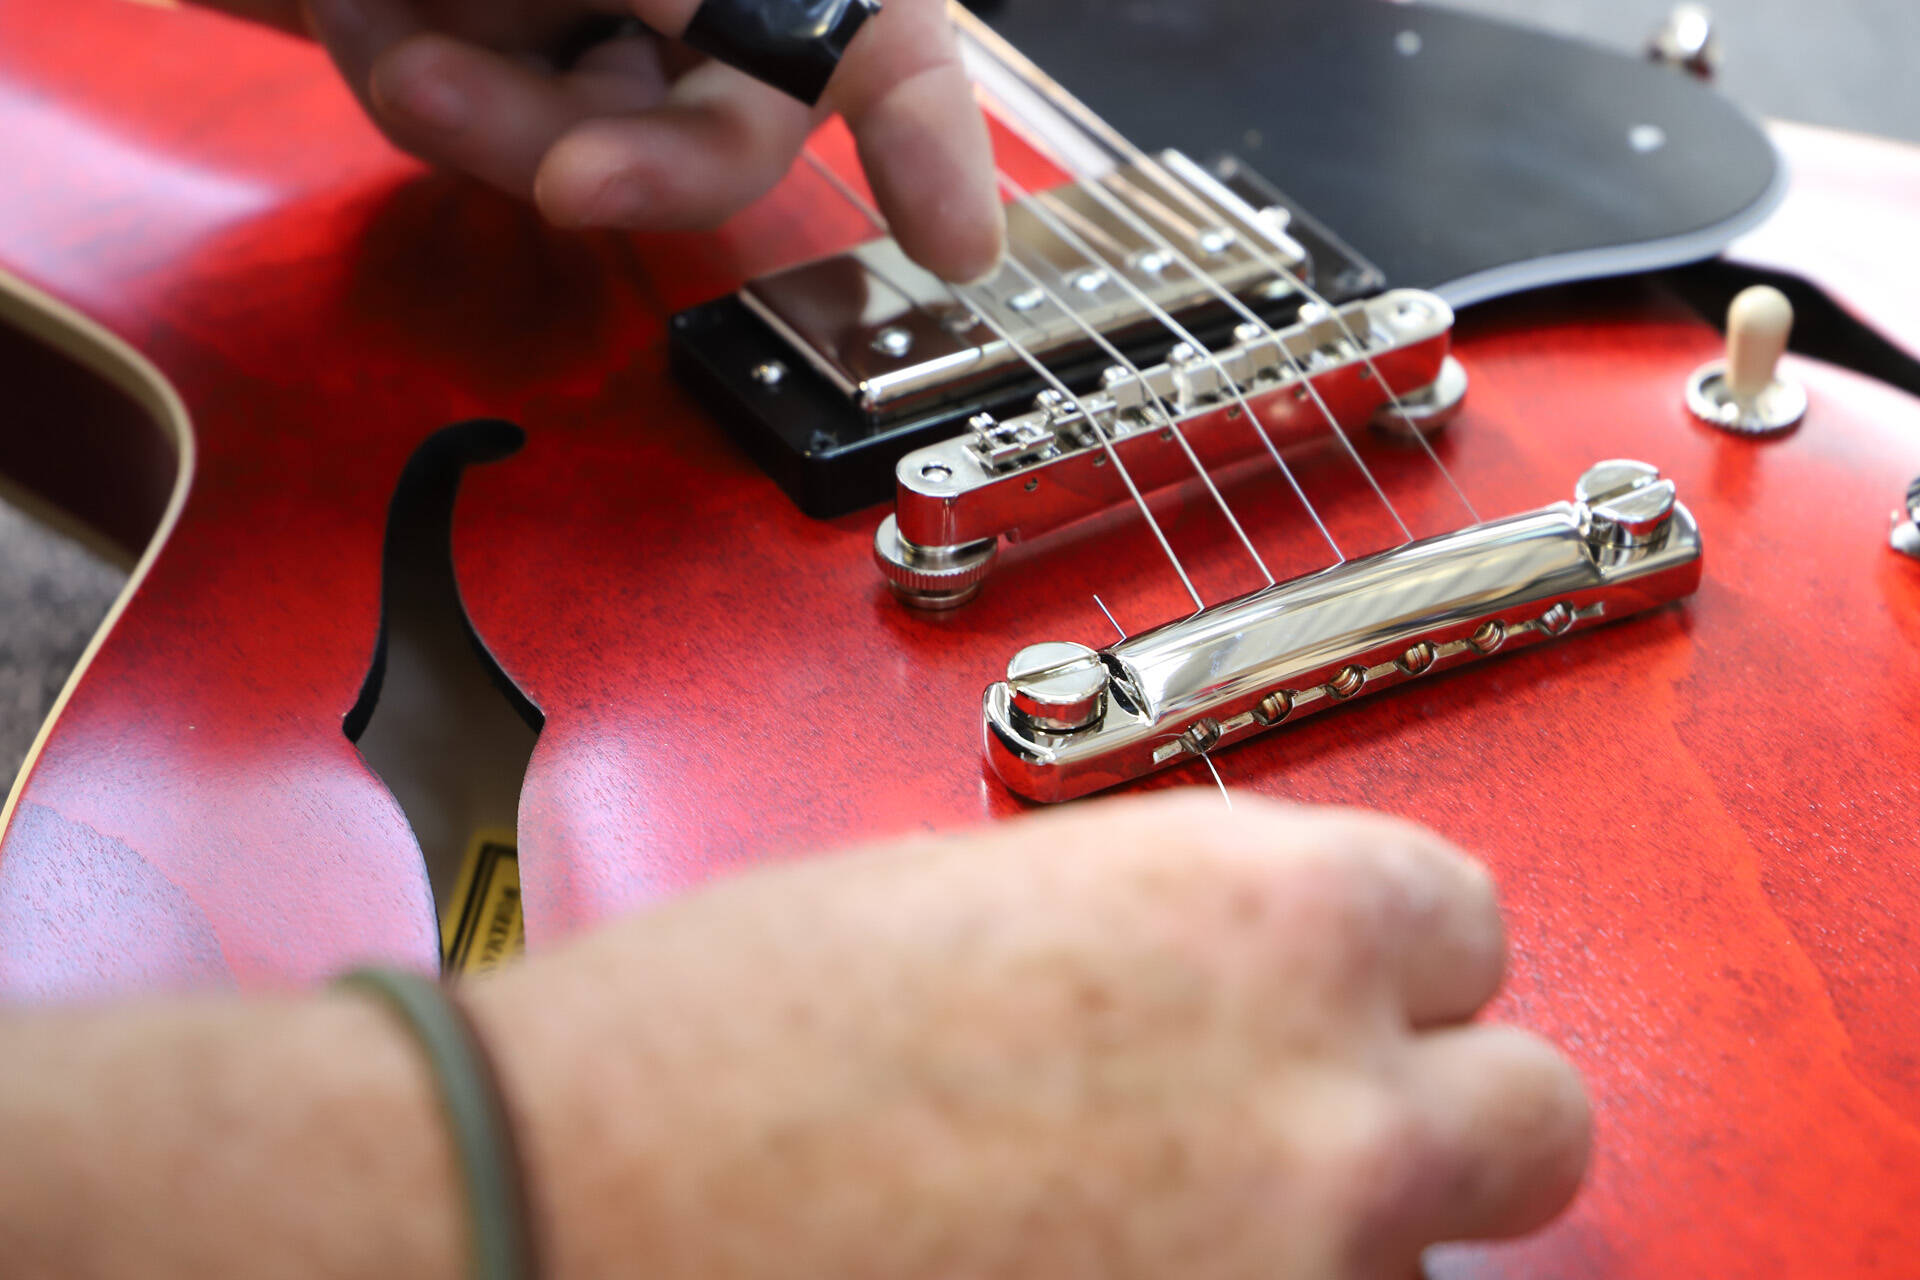 How To Put Strings On An Electric Guitar